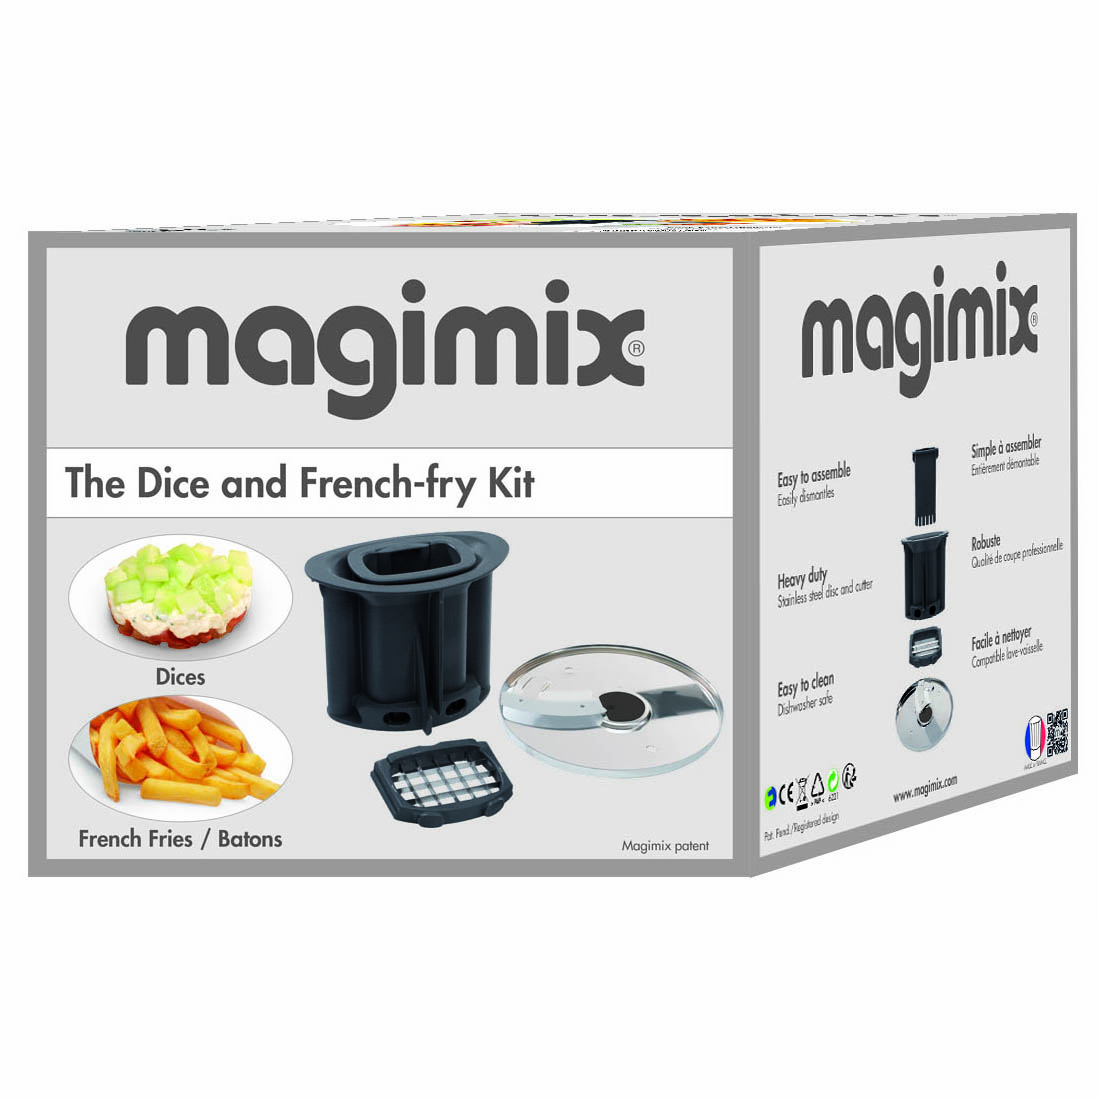 Magimix Dice & French Fry Kit Product Image 1